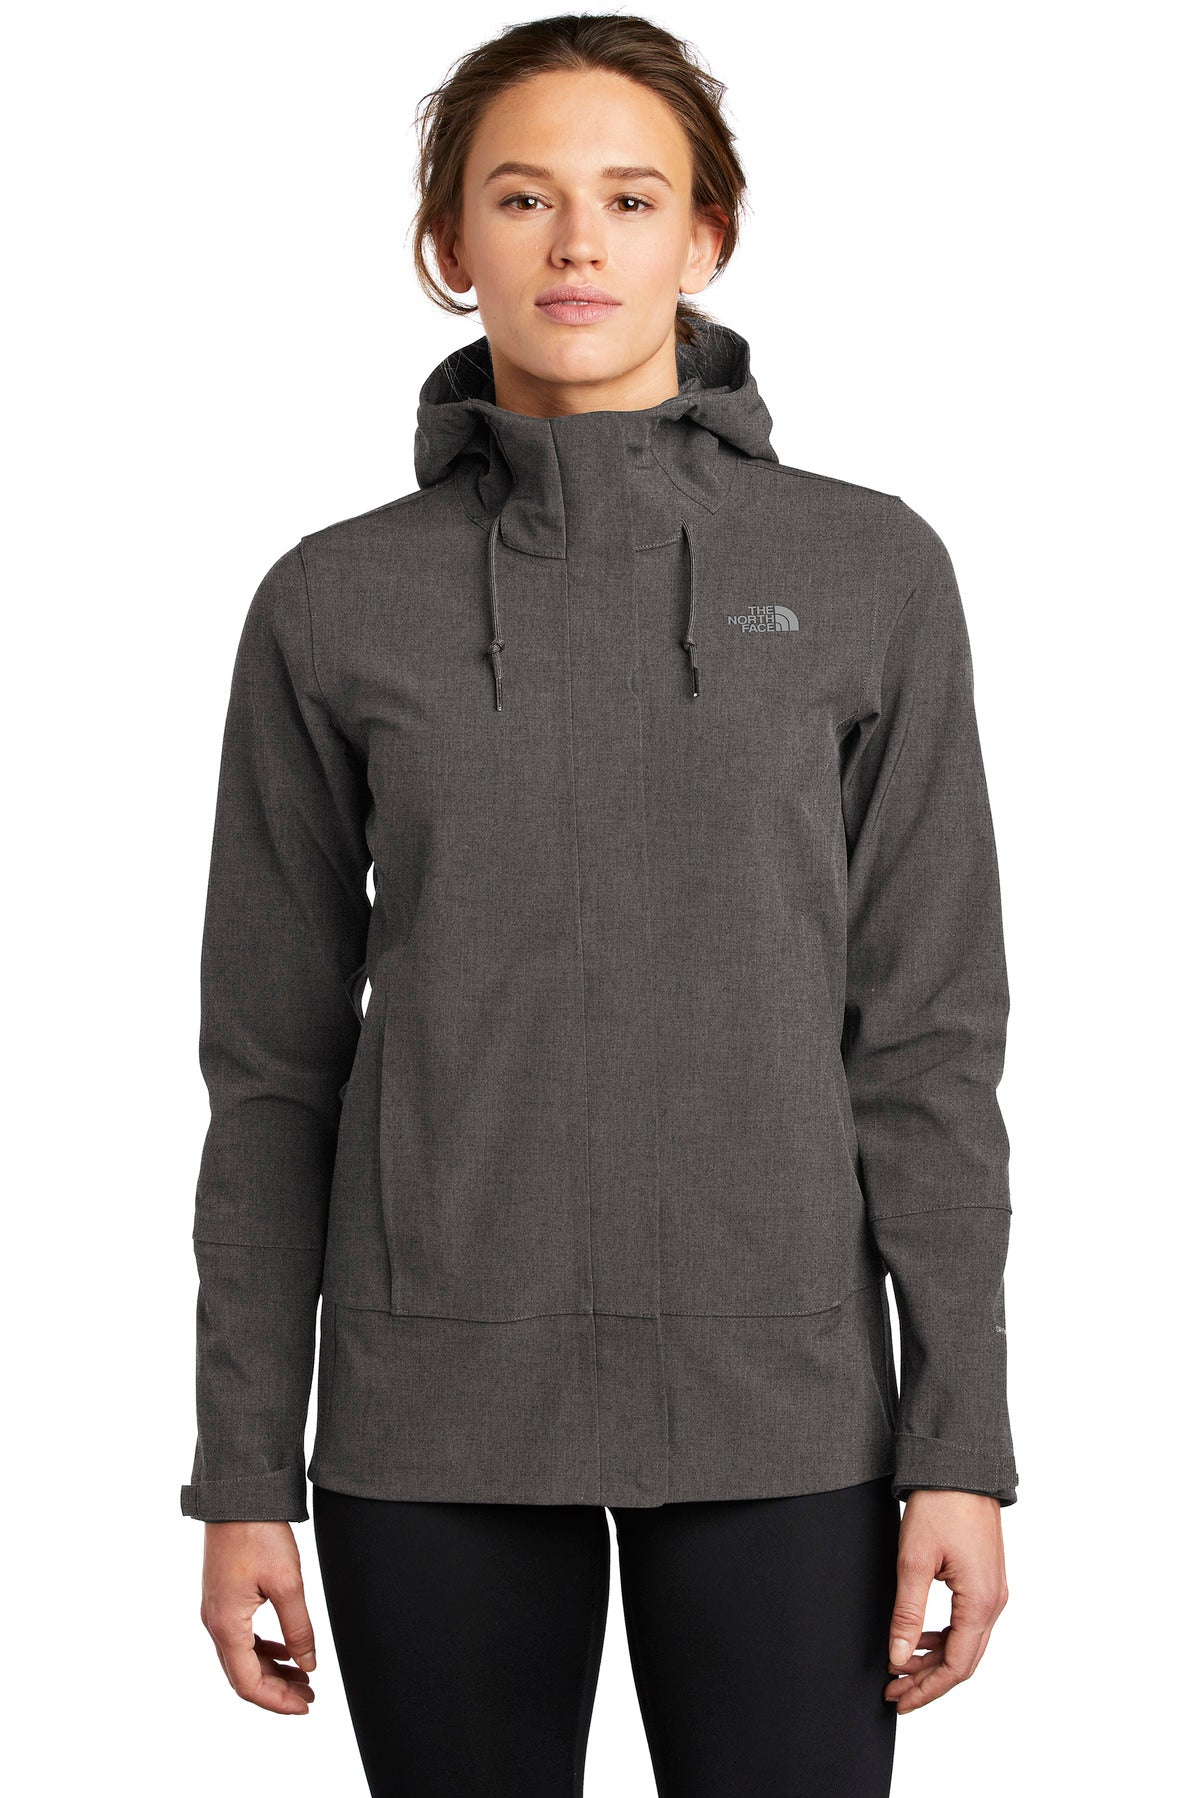 The North Face ® Ladies Apex DryVent ™ Jacket NF0A47FJ - DFW Impression